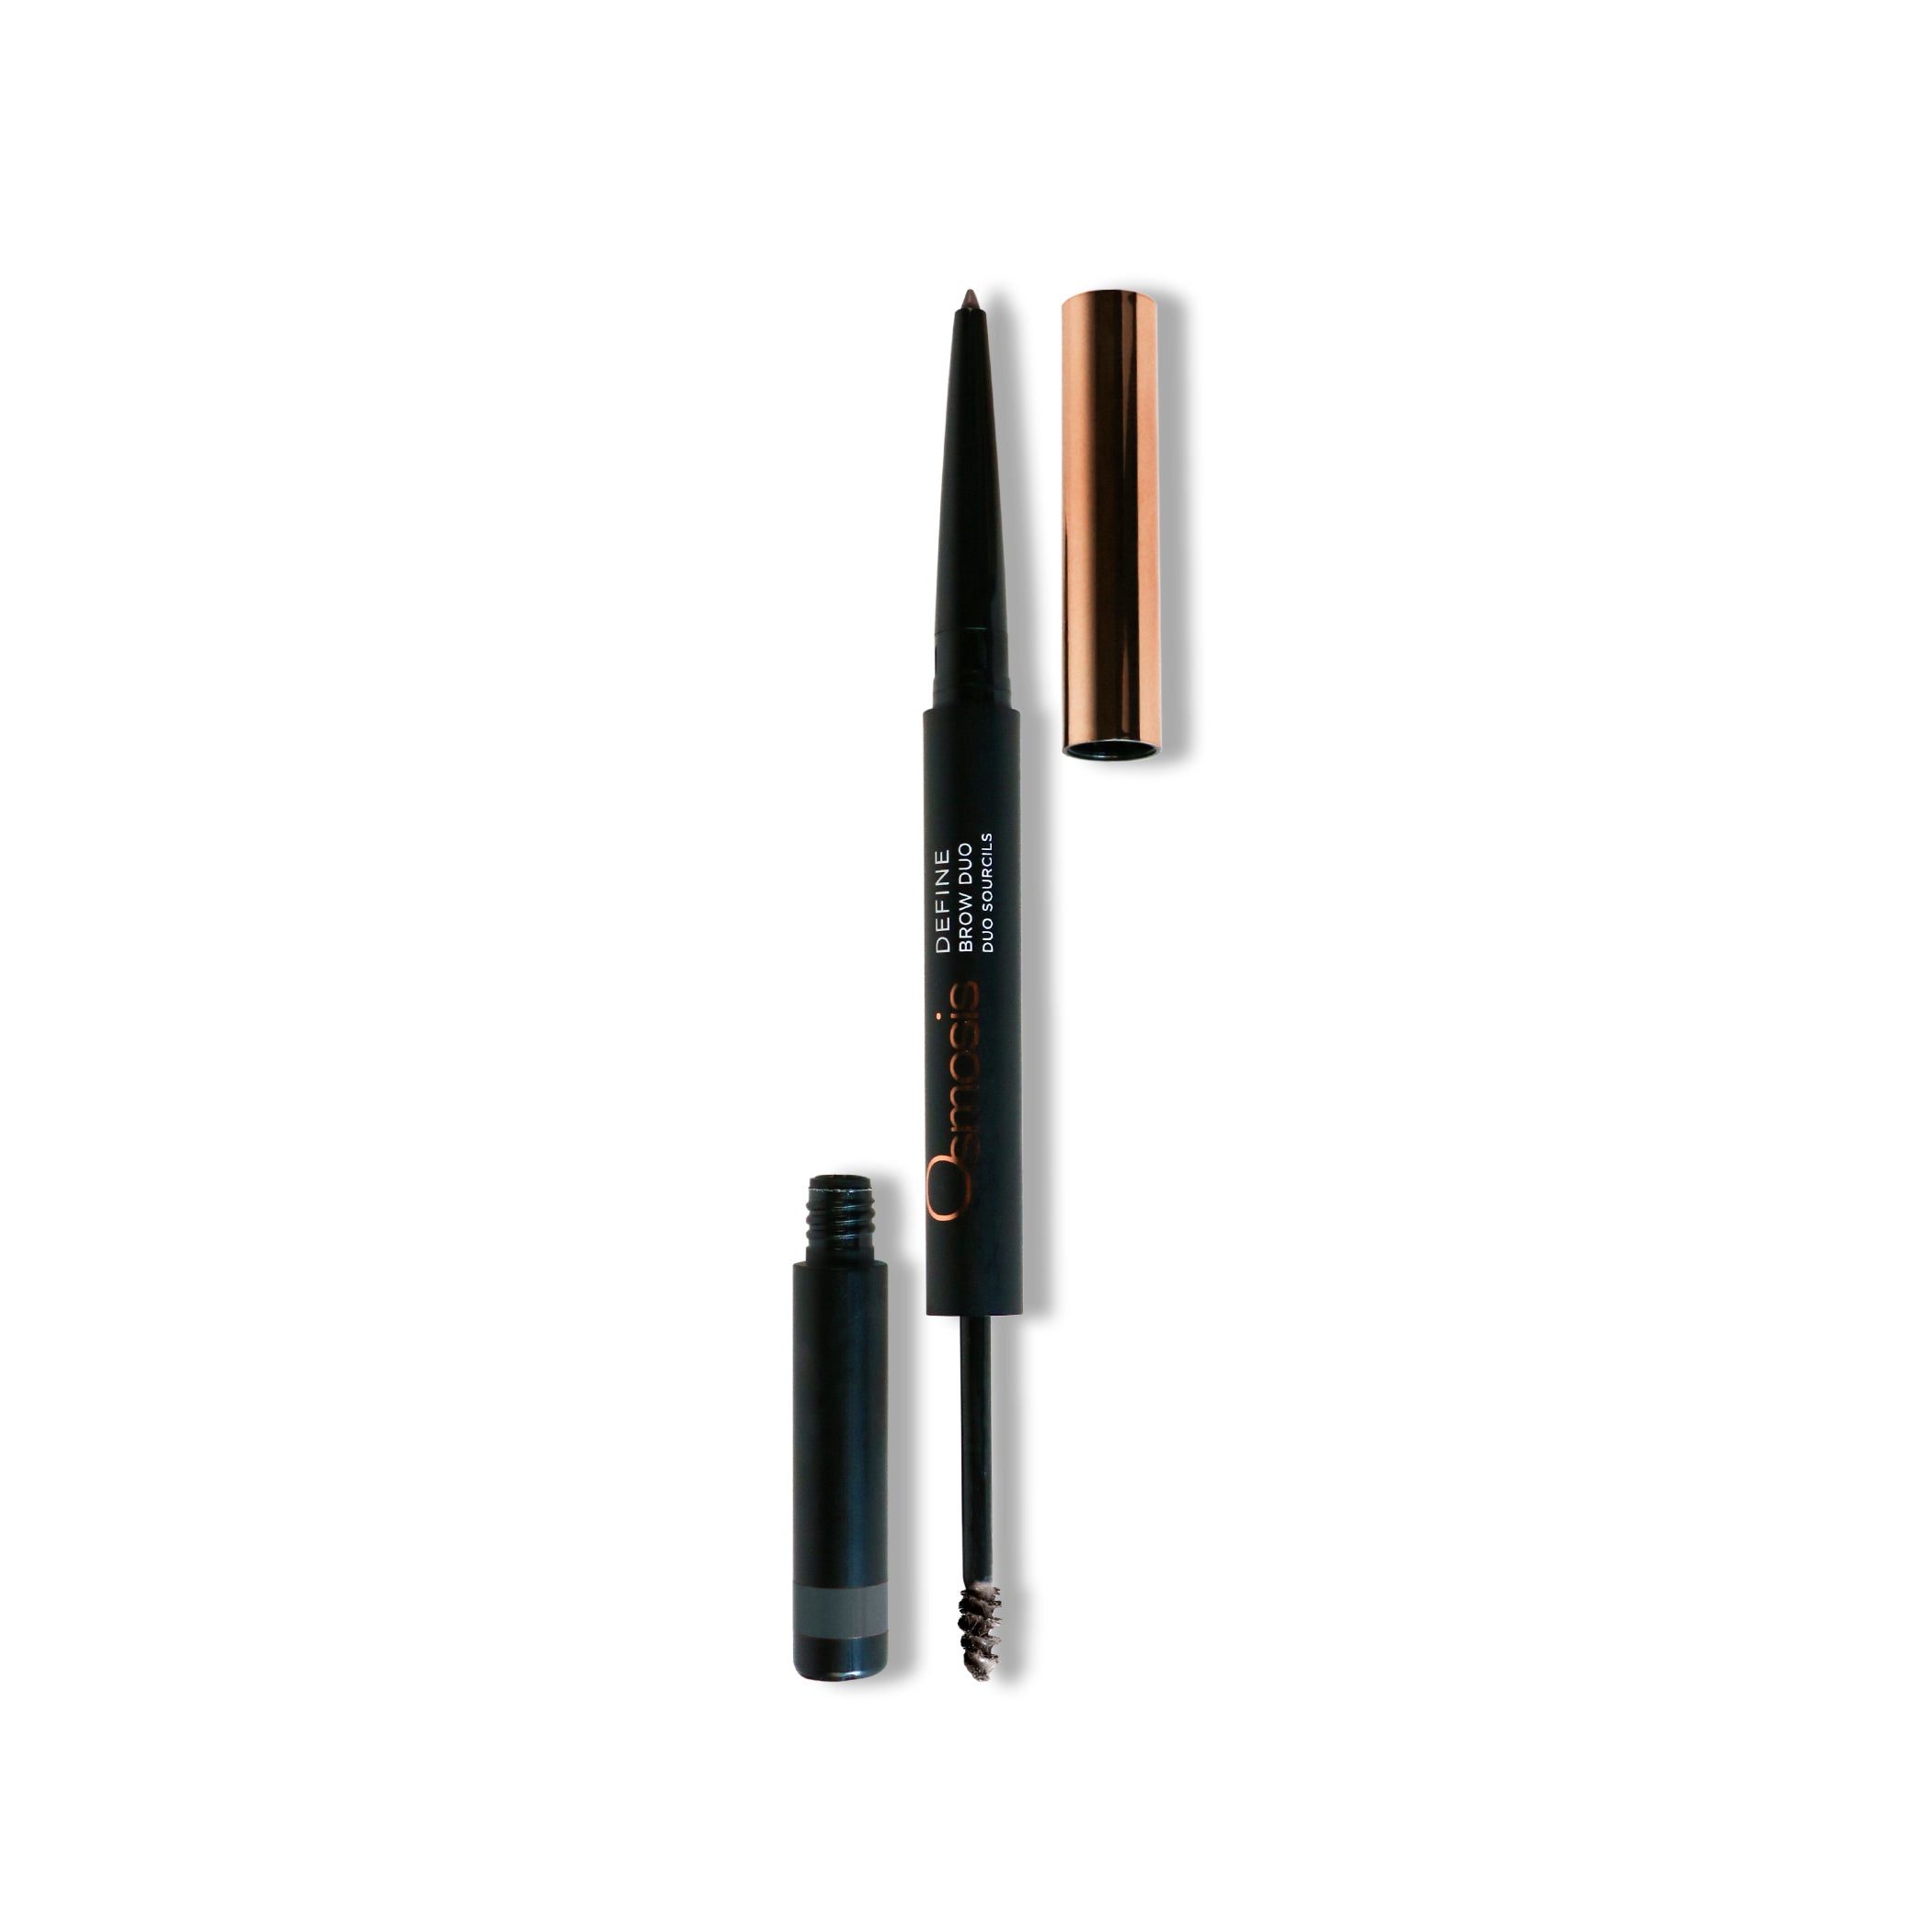 Brow gel and pencil duo color Cocoa by Osmosis Beauty makeup displayed with open caps on white background